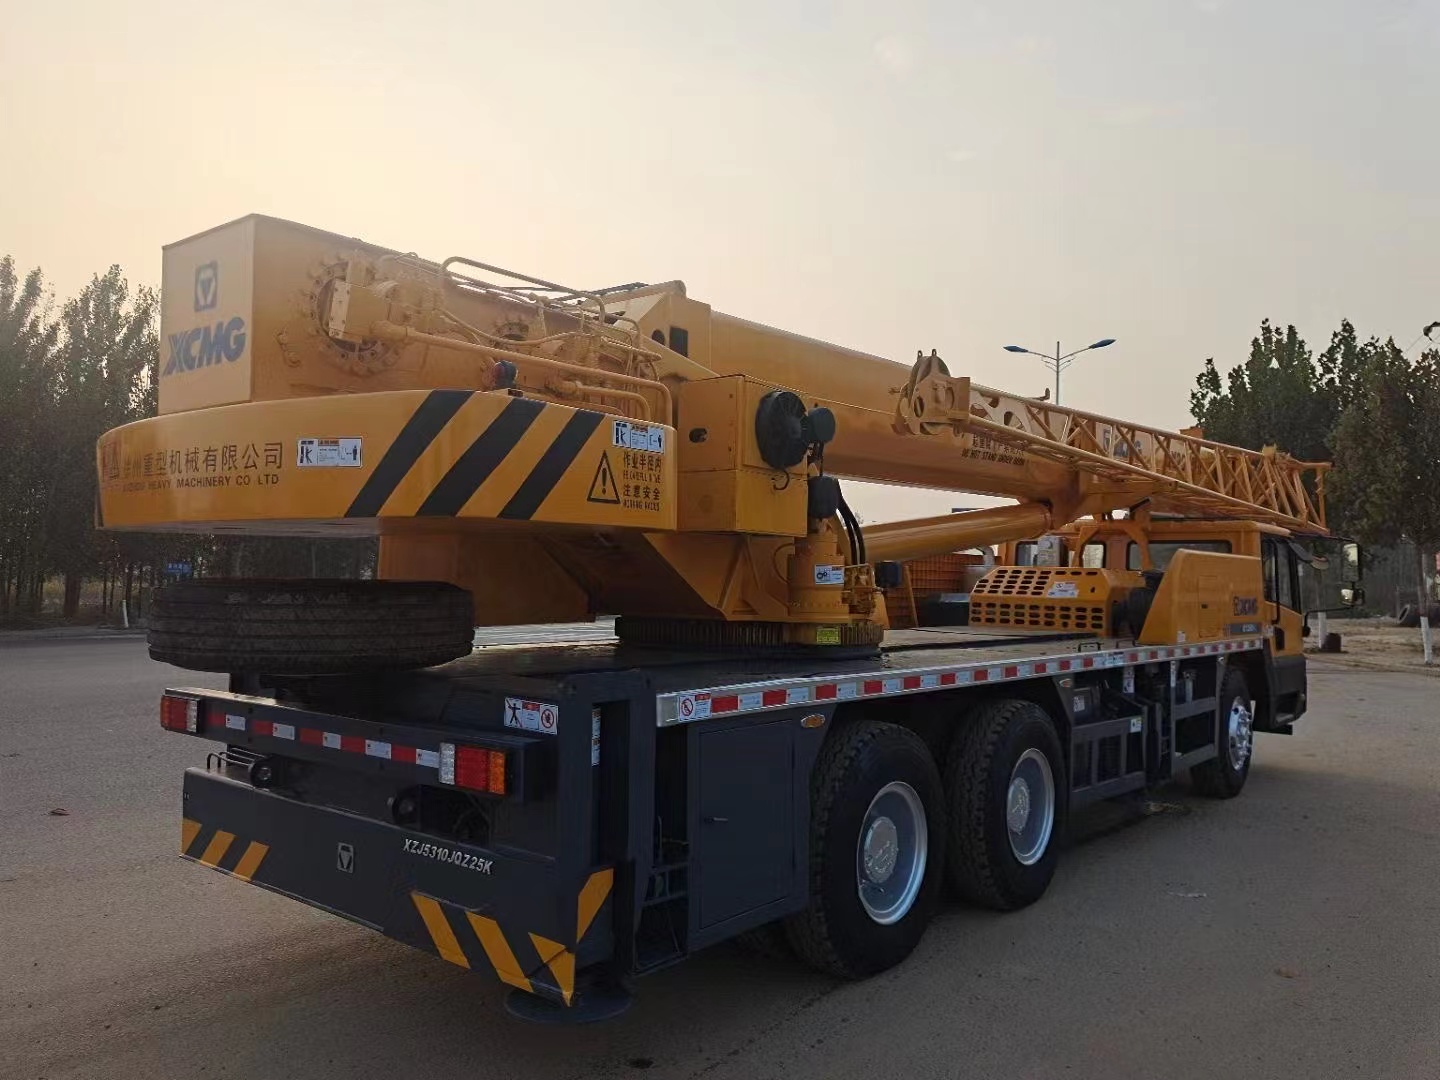 Used crane XCMG QY25k5 With 25 tons lifting capacity For lifting various large-scale projects 5